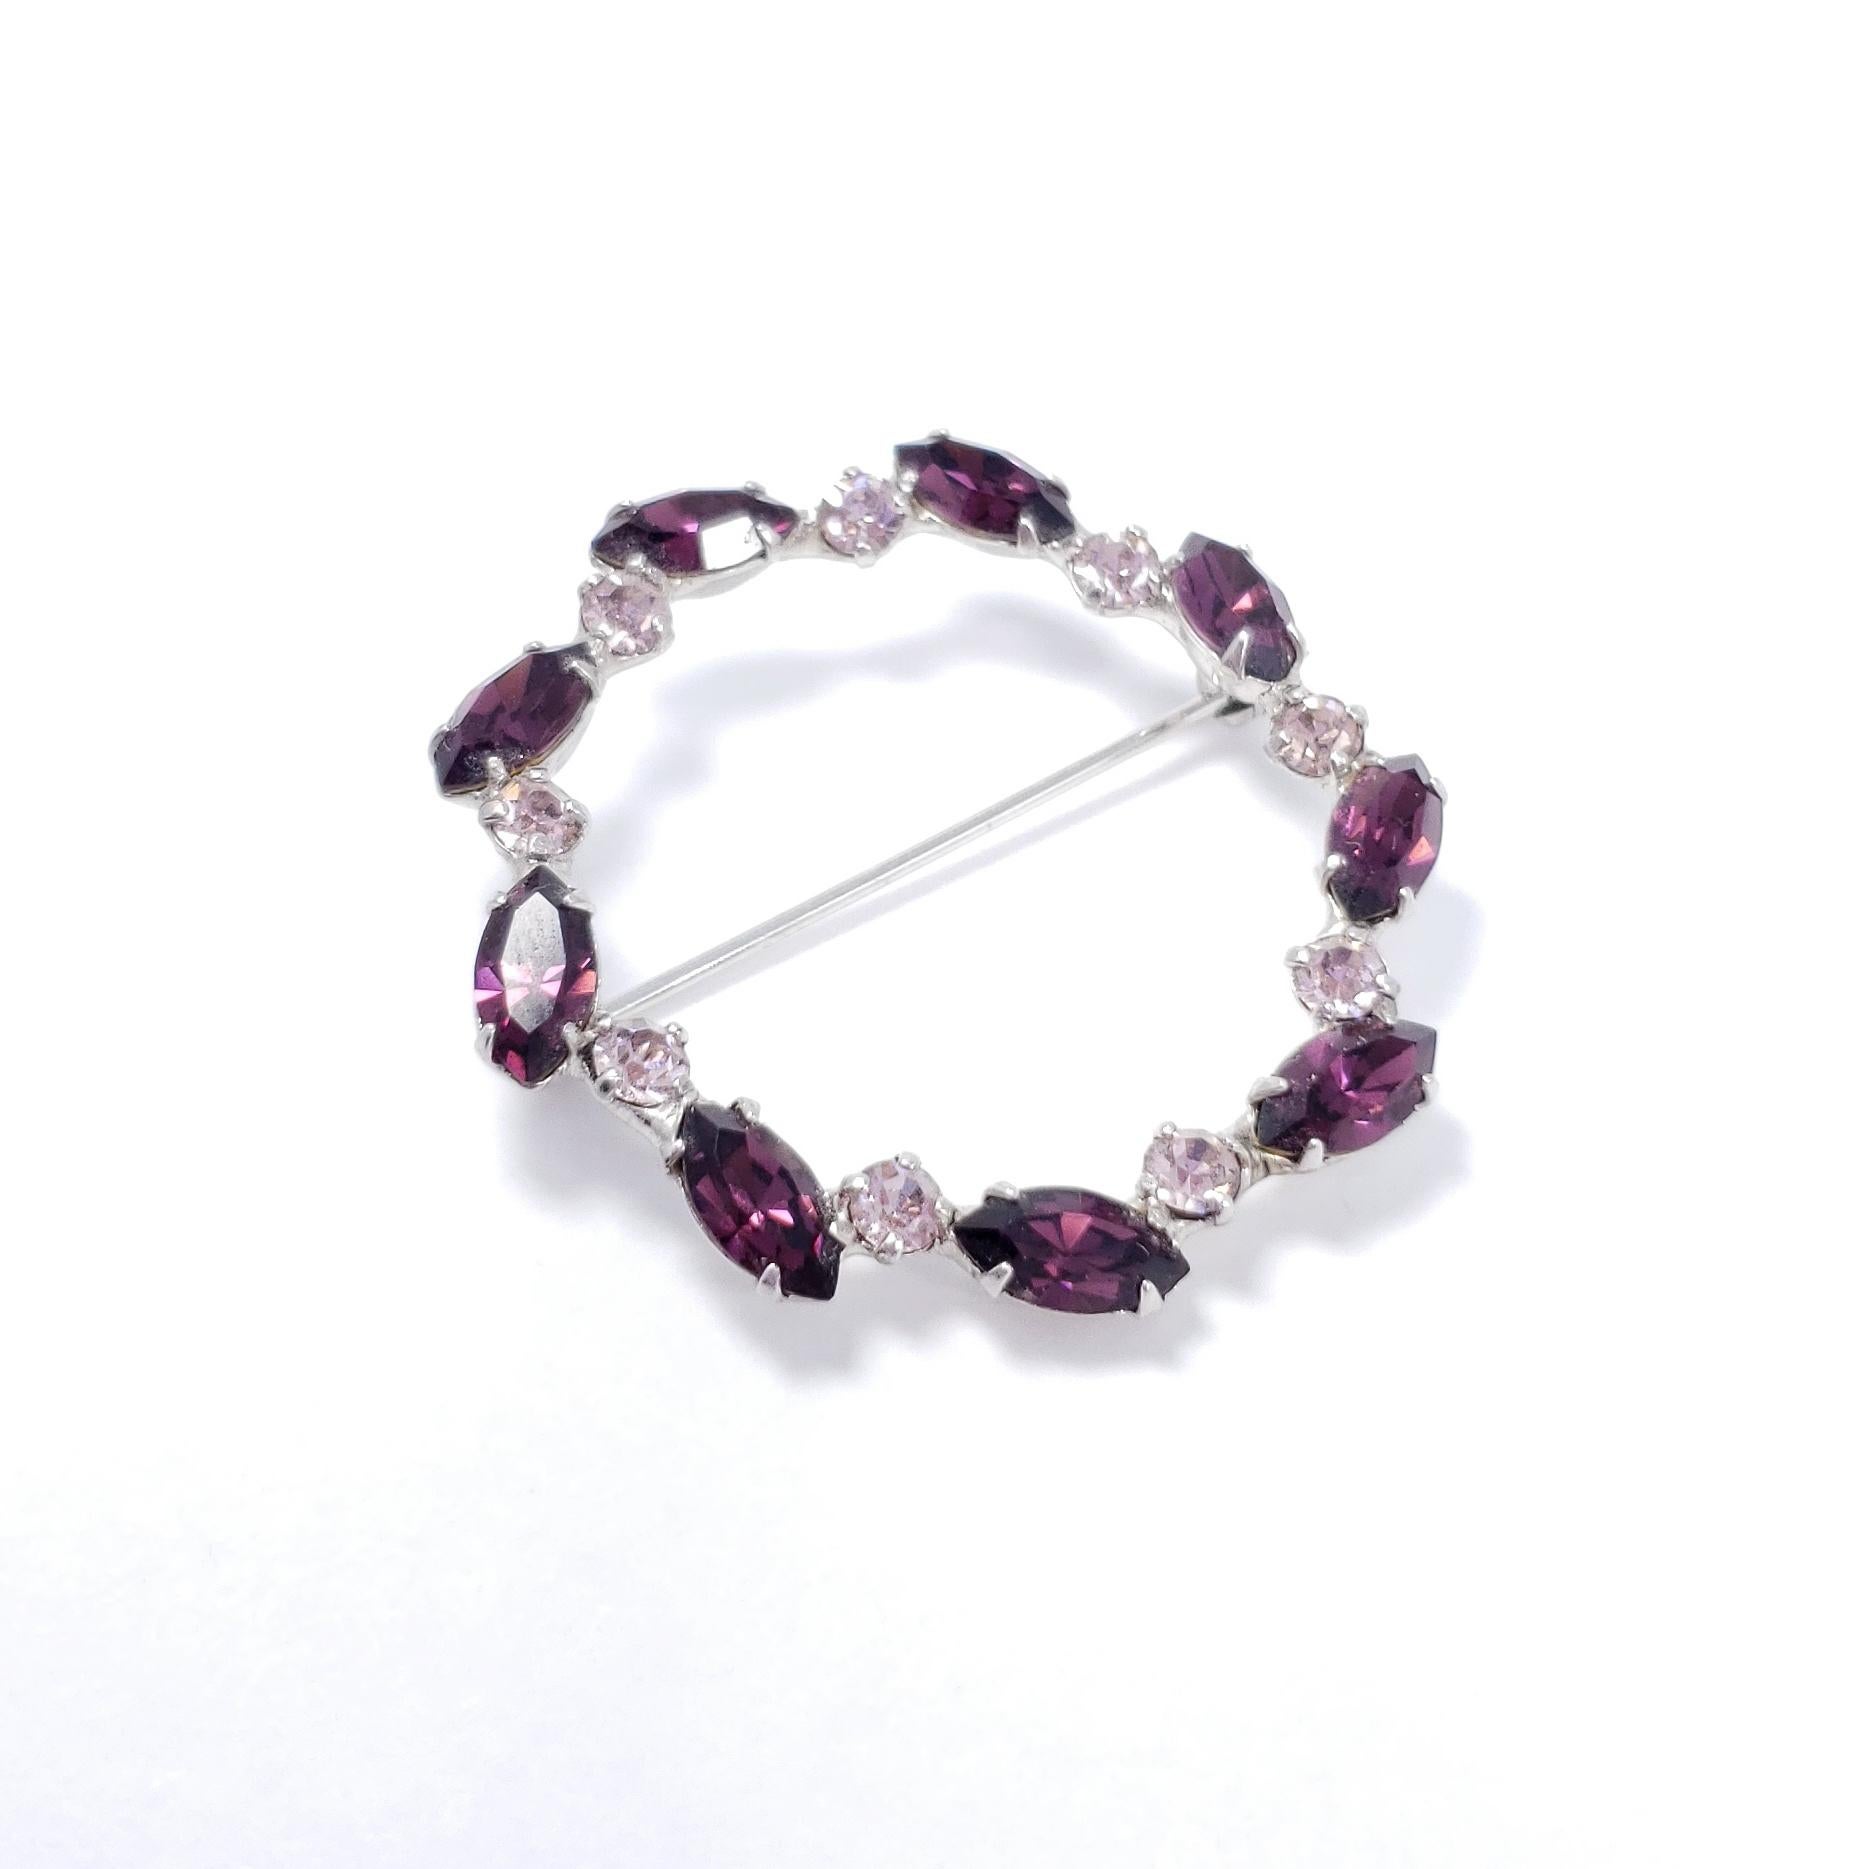 Pink and amethyst crystals prong-set in an open round silver-tone setting. A classy retro pin!

Circa mid 1900s.